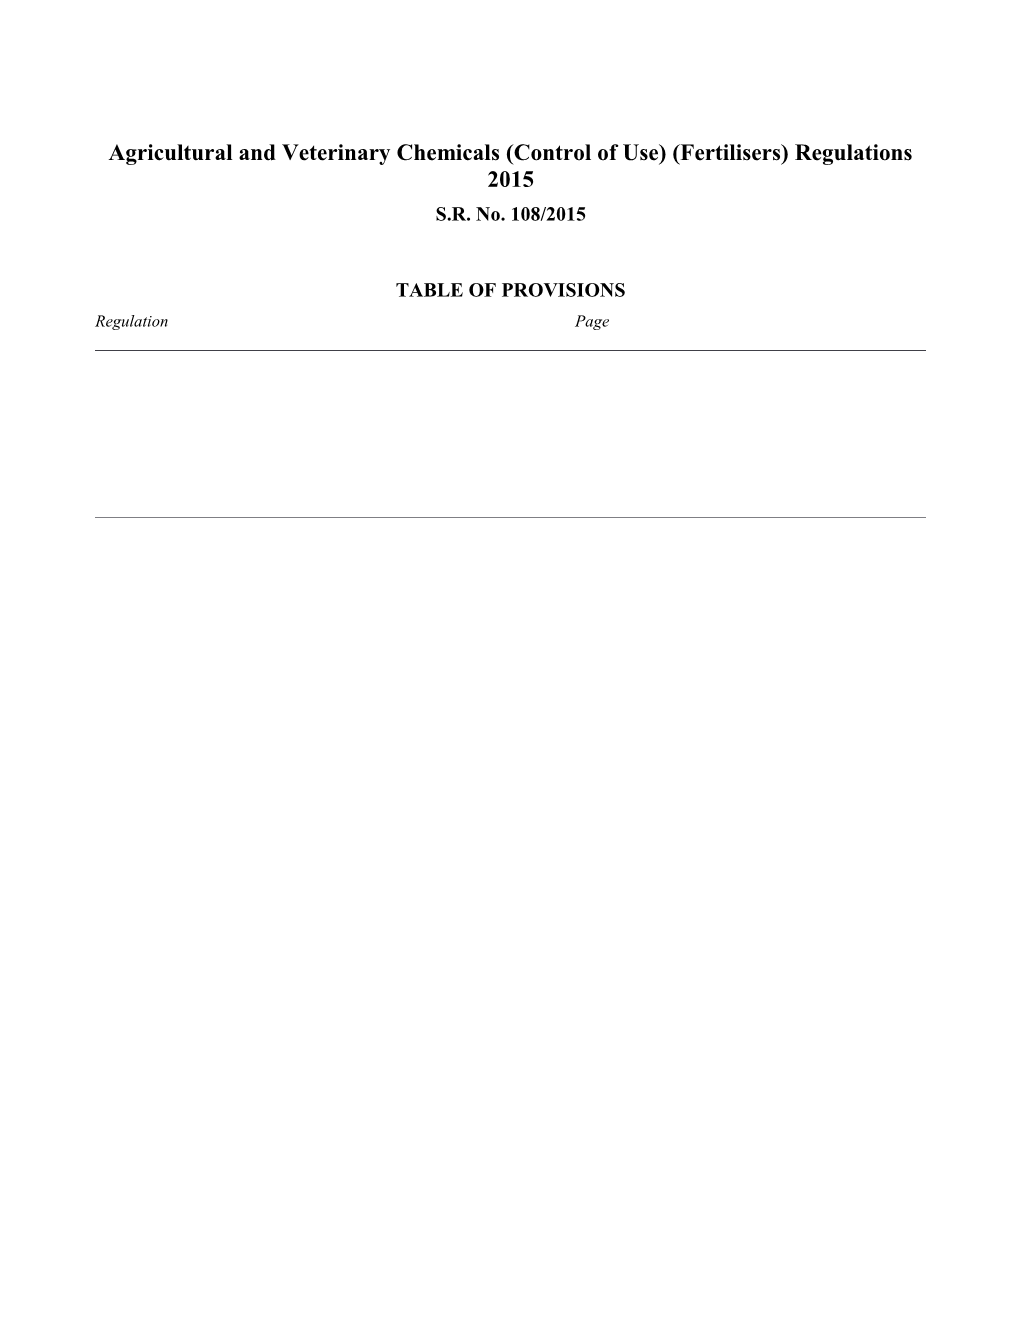 Agricultural and Veterinary Chemicals (Control of Use) (Fertilisers) Regulations 2015